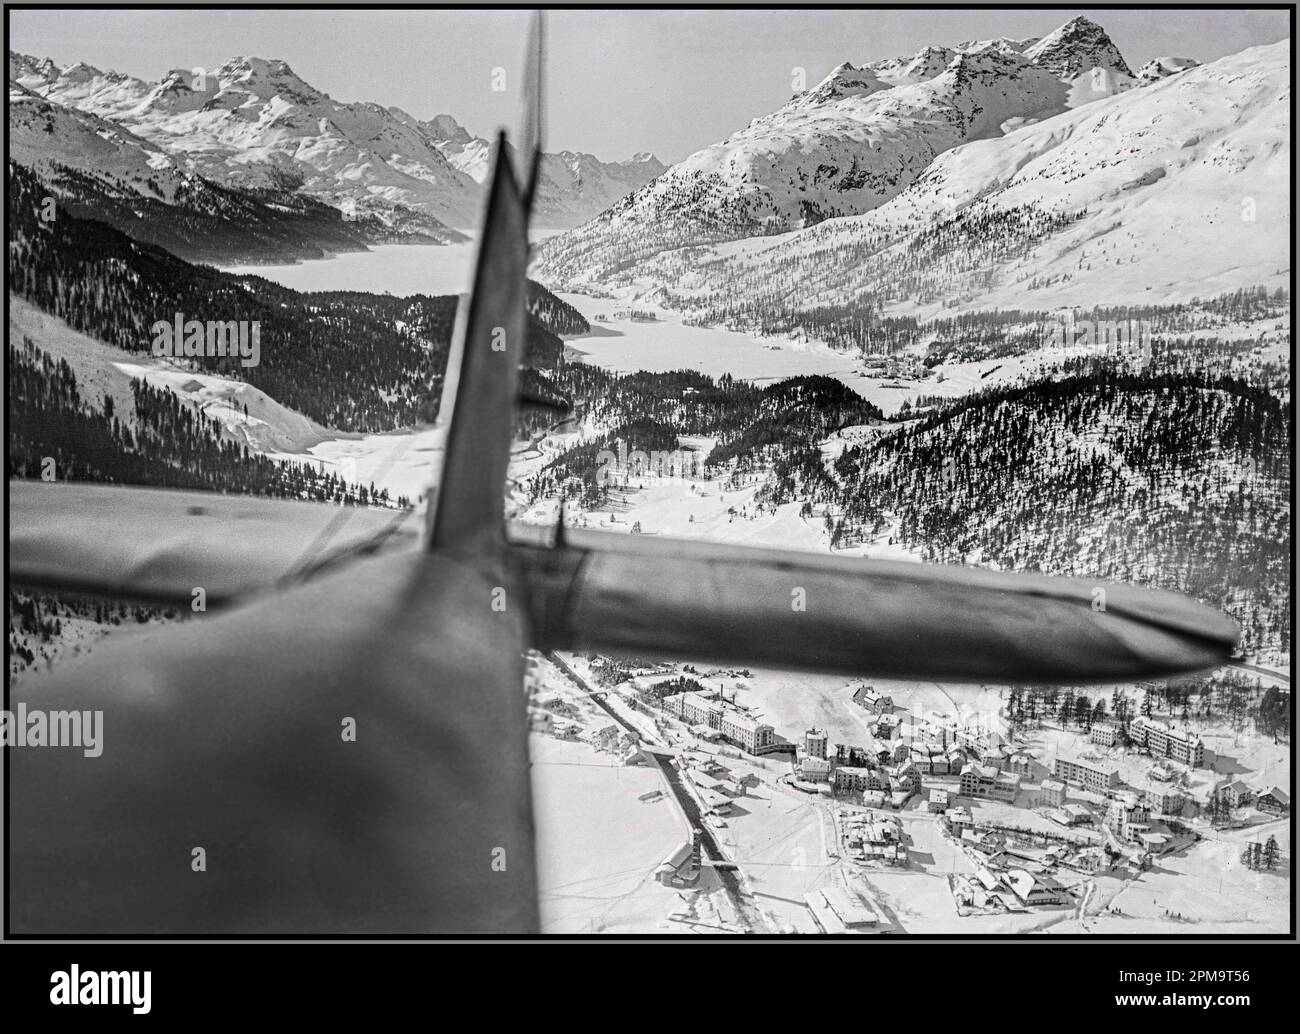 Vintage St. Moritz under snow viewed from an airplane at 400m, Lake Sils, Maloja, Switzerland 1919 by  Walter Mittelholzer  (1894–1937)  Swissair Fokker F.VII a at the  Lake St. Moritz Description: Sightseeing flights mainly took place in the early 1930s, with Swissair between 1932 and 1934 Stock Photo